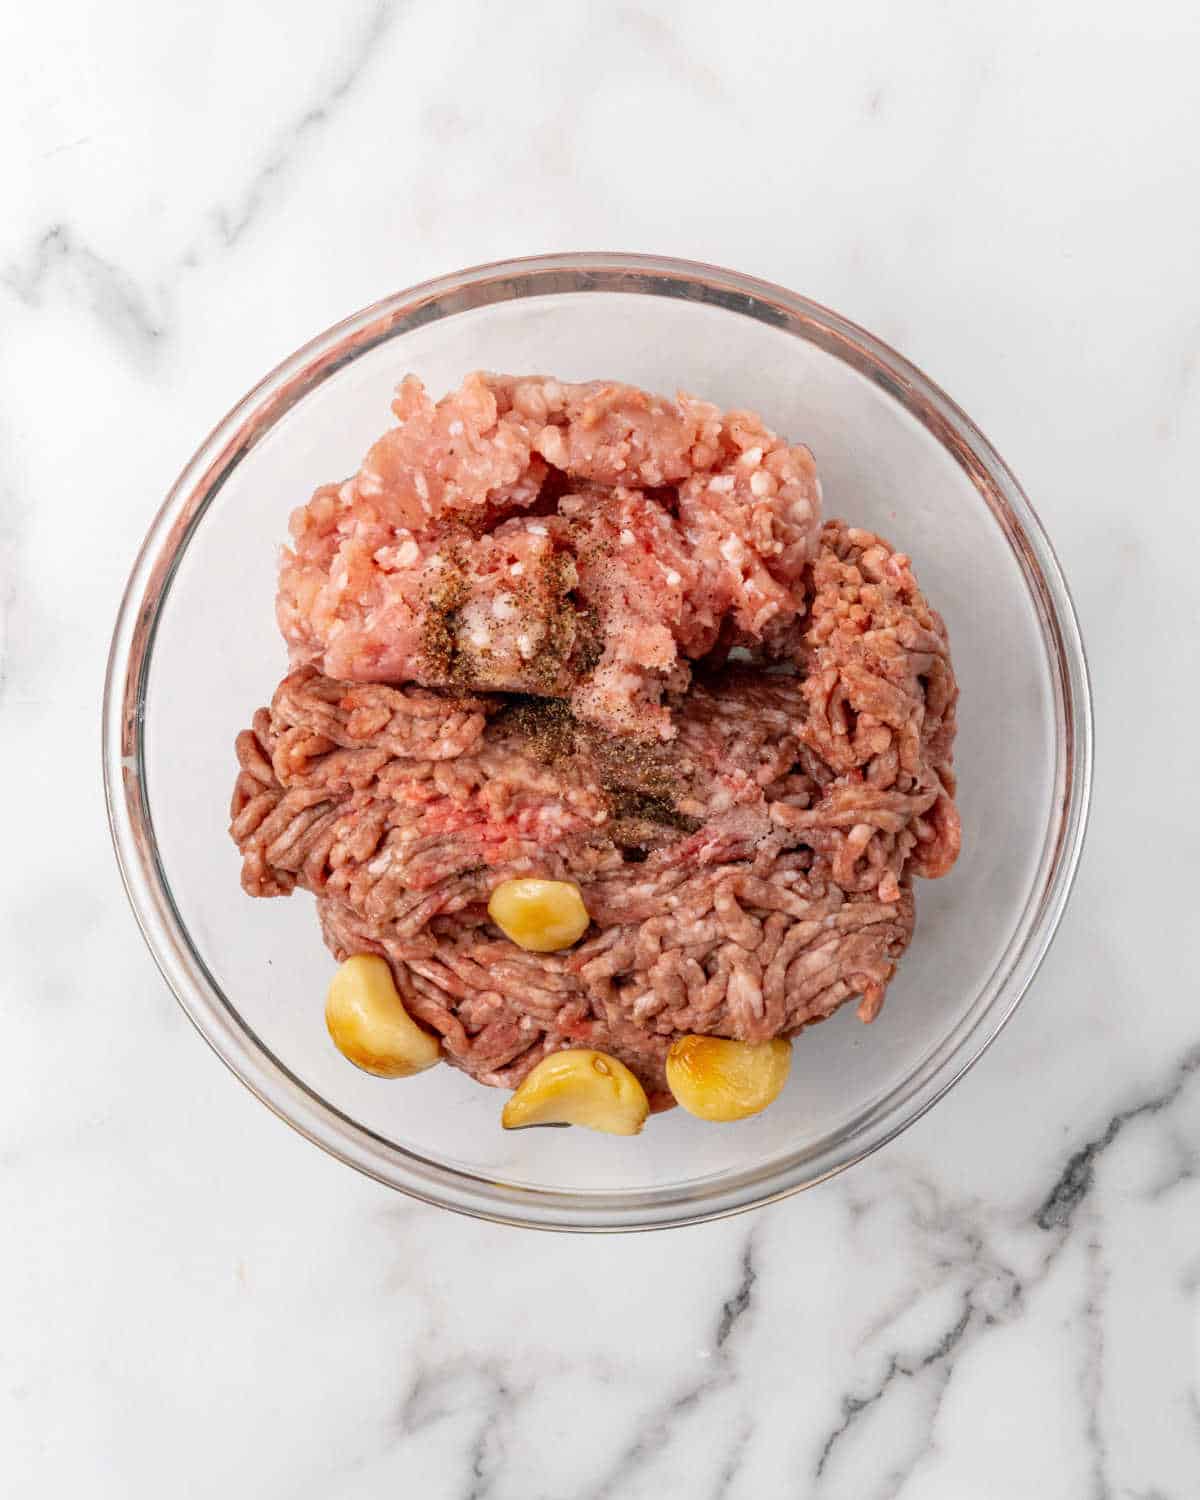 Glass bowl with ground beef, garlic cloves and spices on a white marble surface.